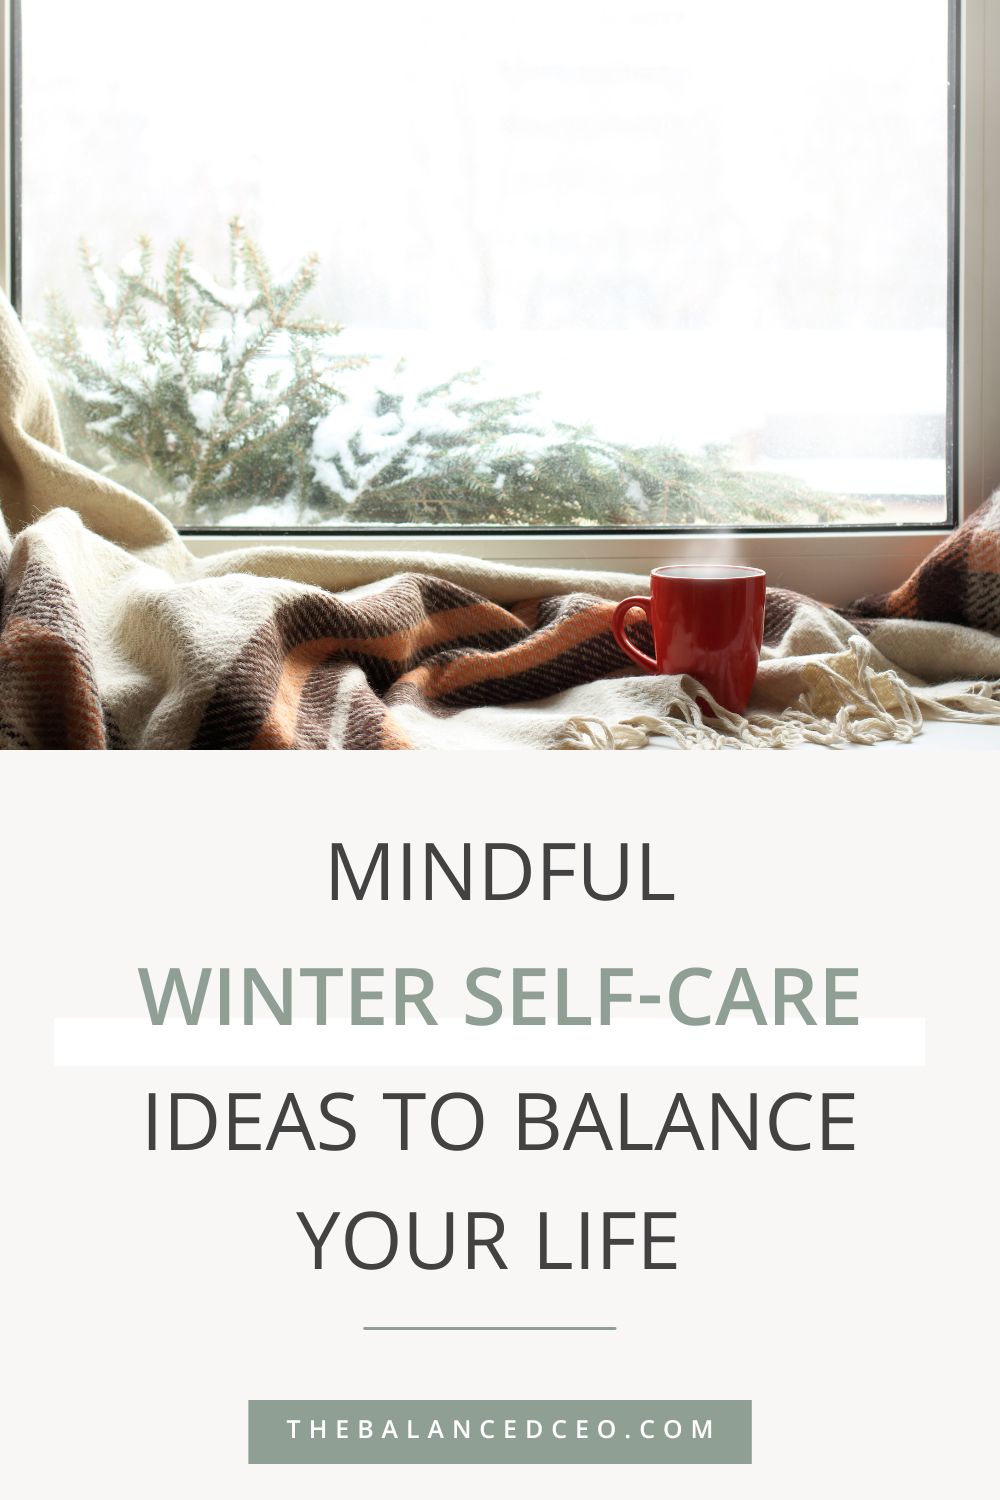 Mindful Winter Self-Care Ideas to Balance Your Life